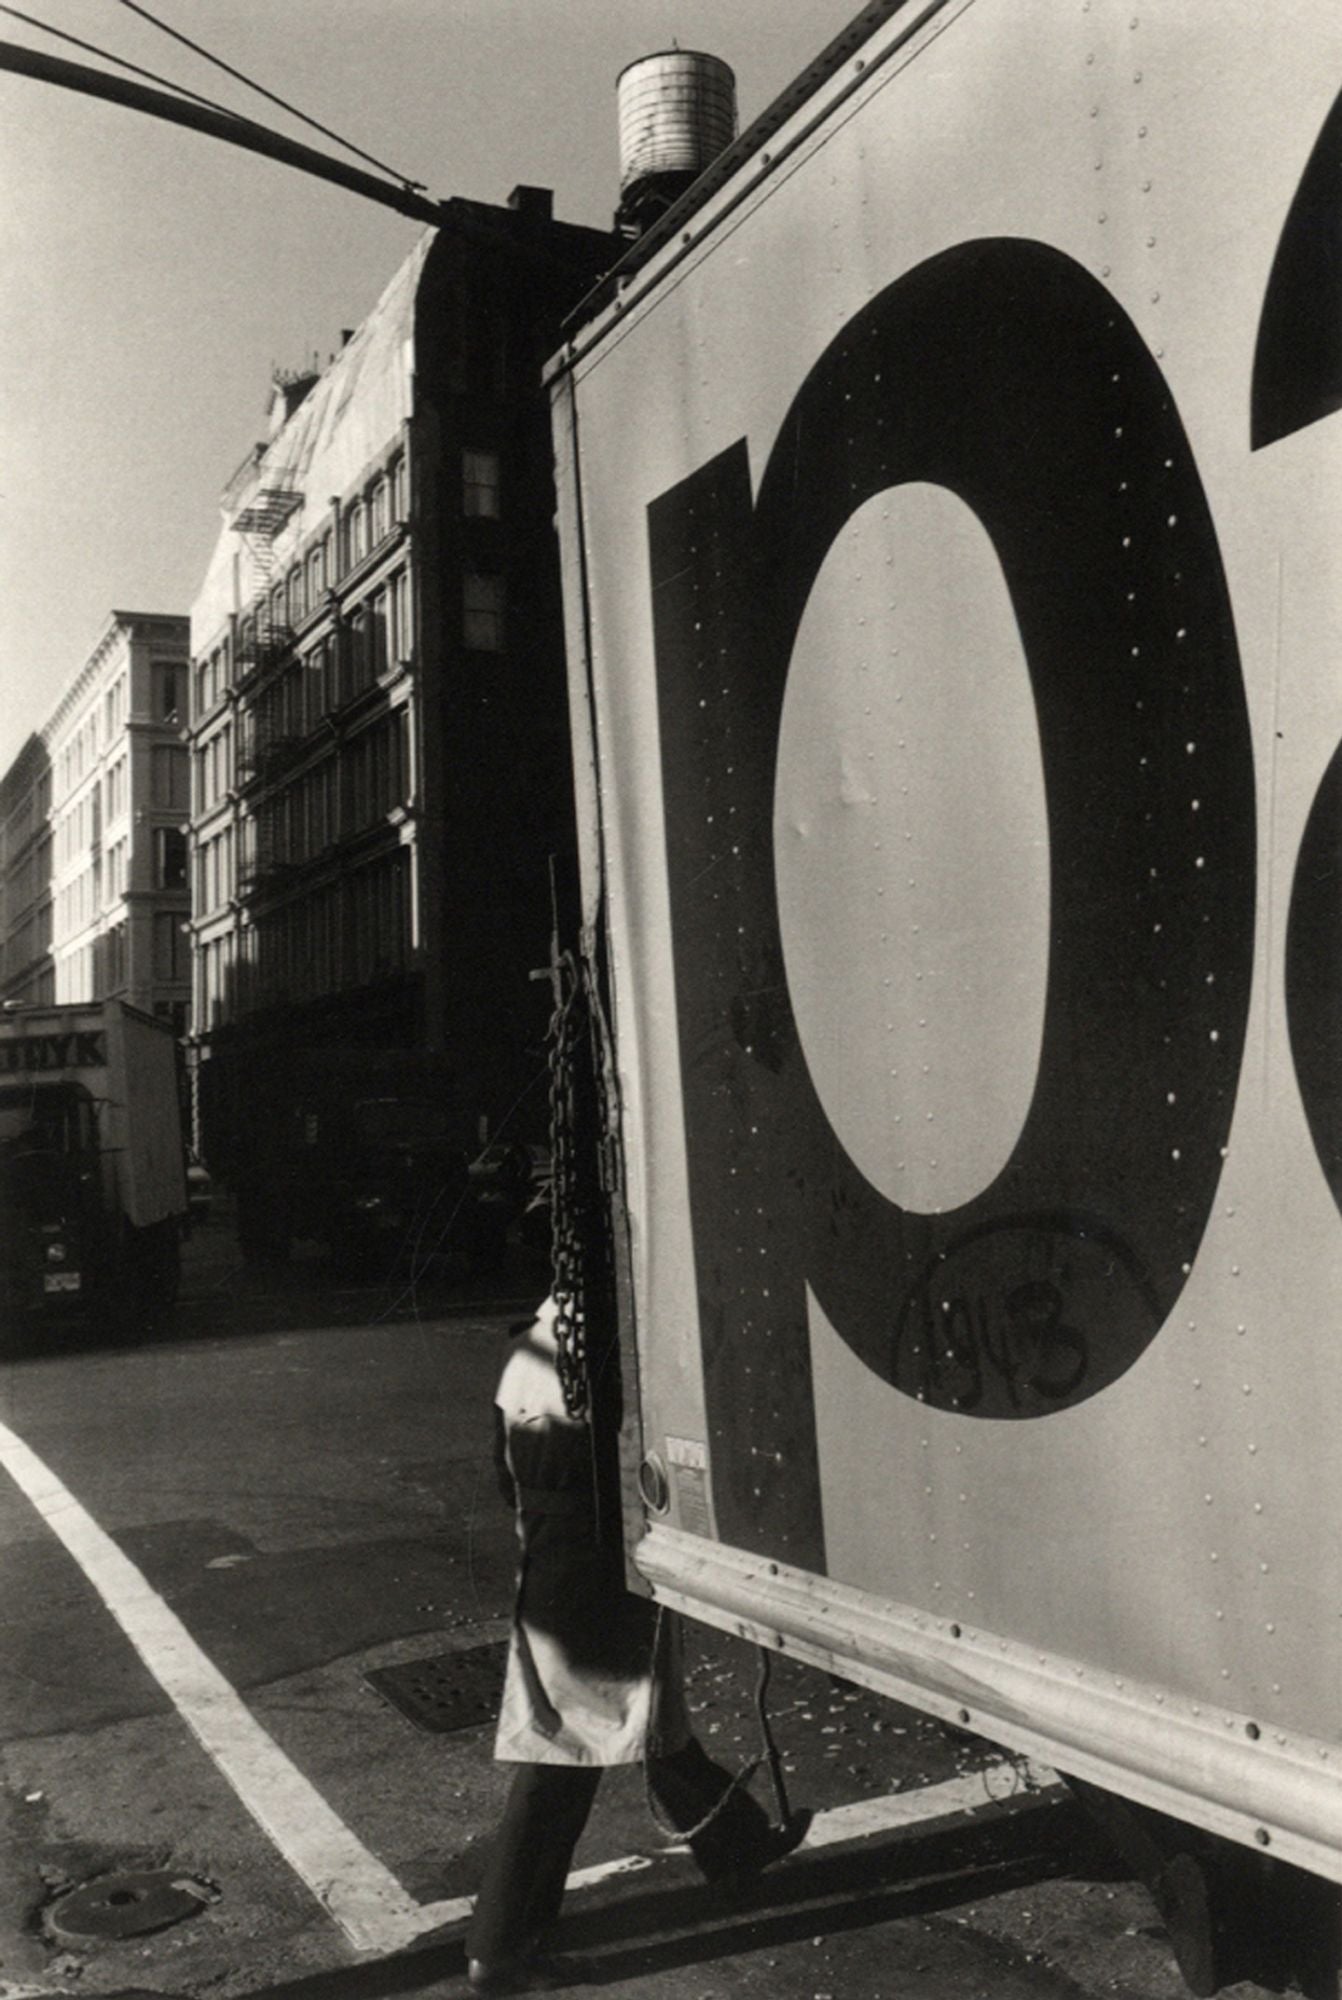 Lee Friedlander: Letters from the People (Special Limited Edition with One Vintage Gelatin Silver Print: "P")